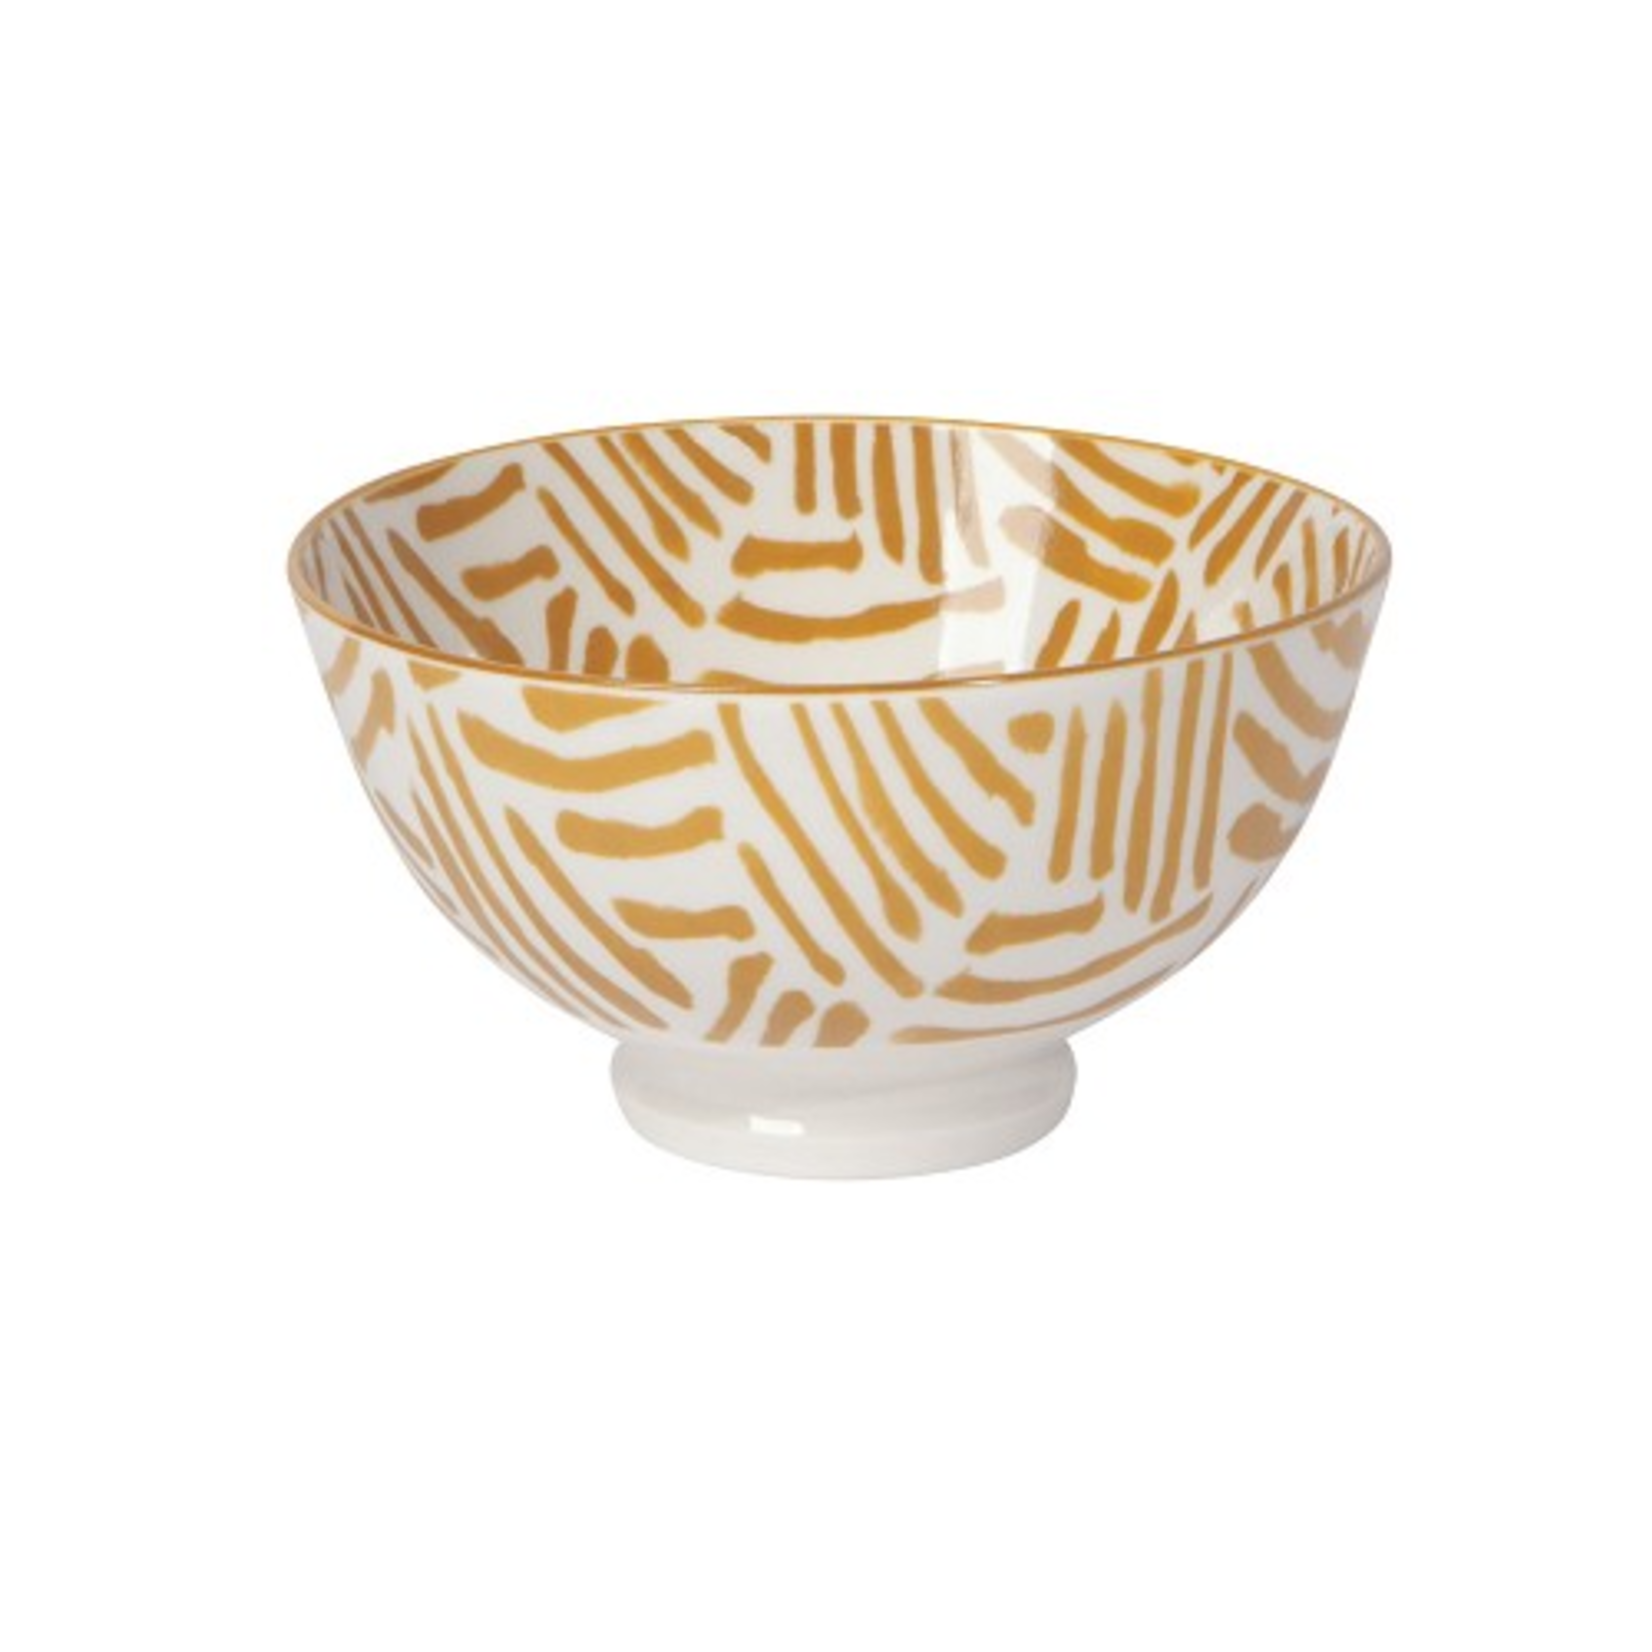 Now Designs Stamped Bowl, Ochre Lines 4"